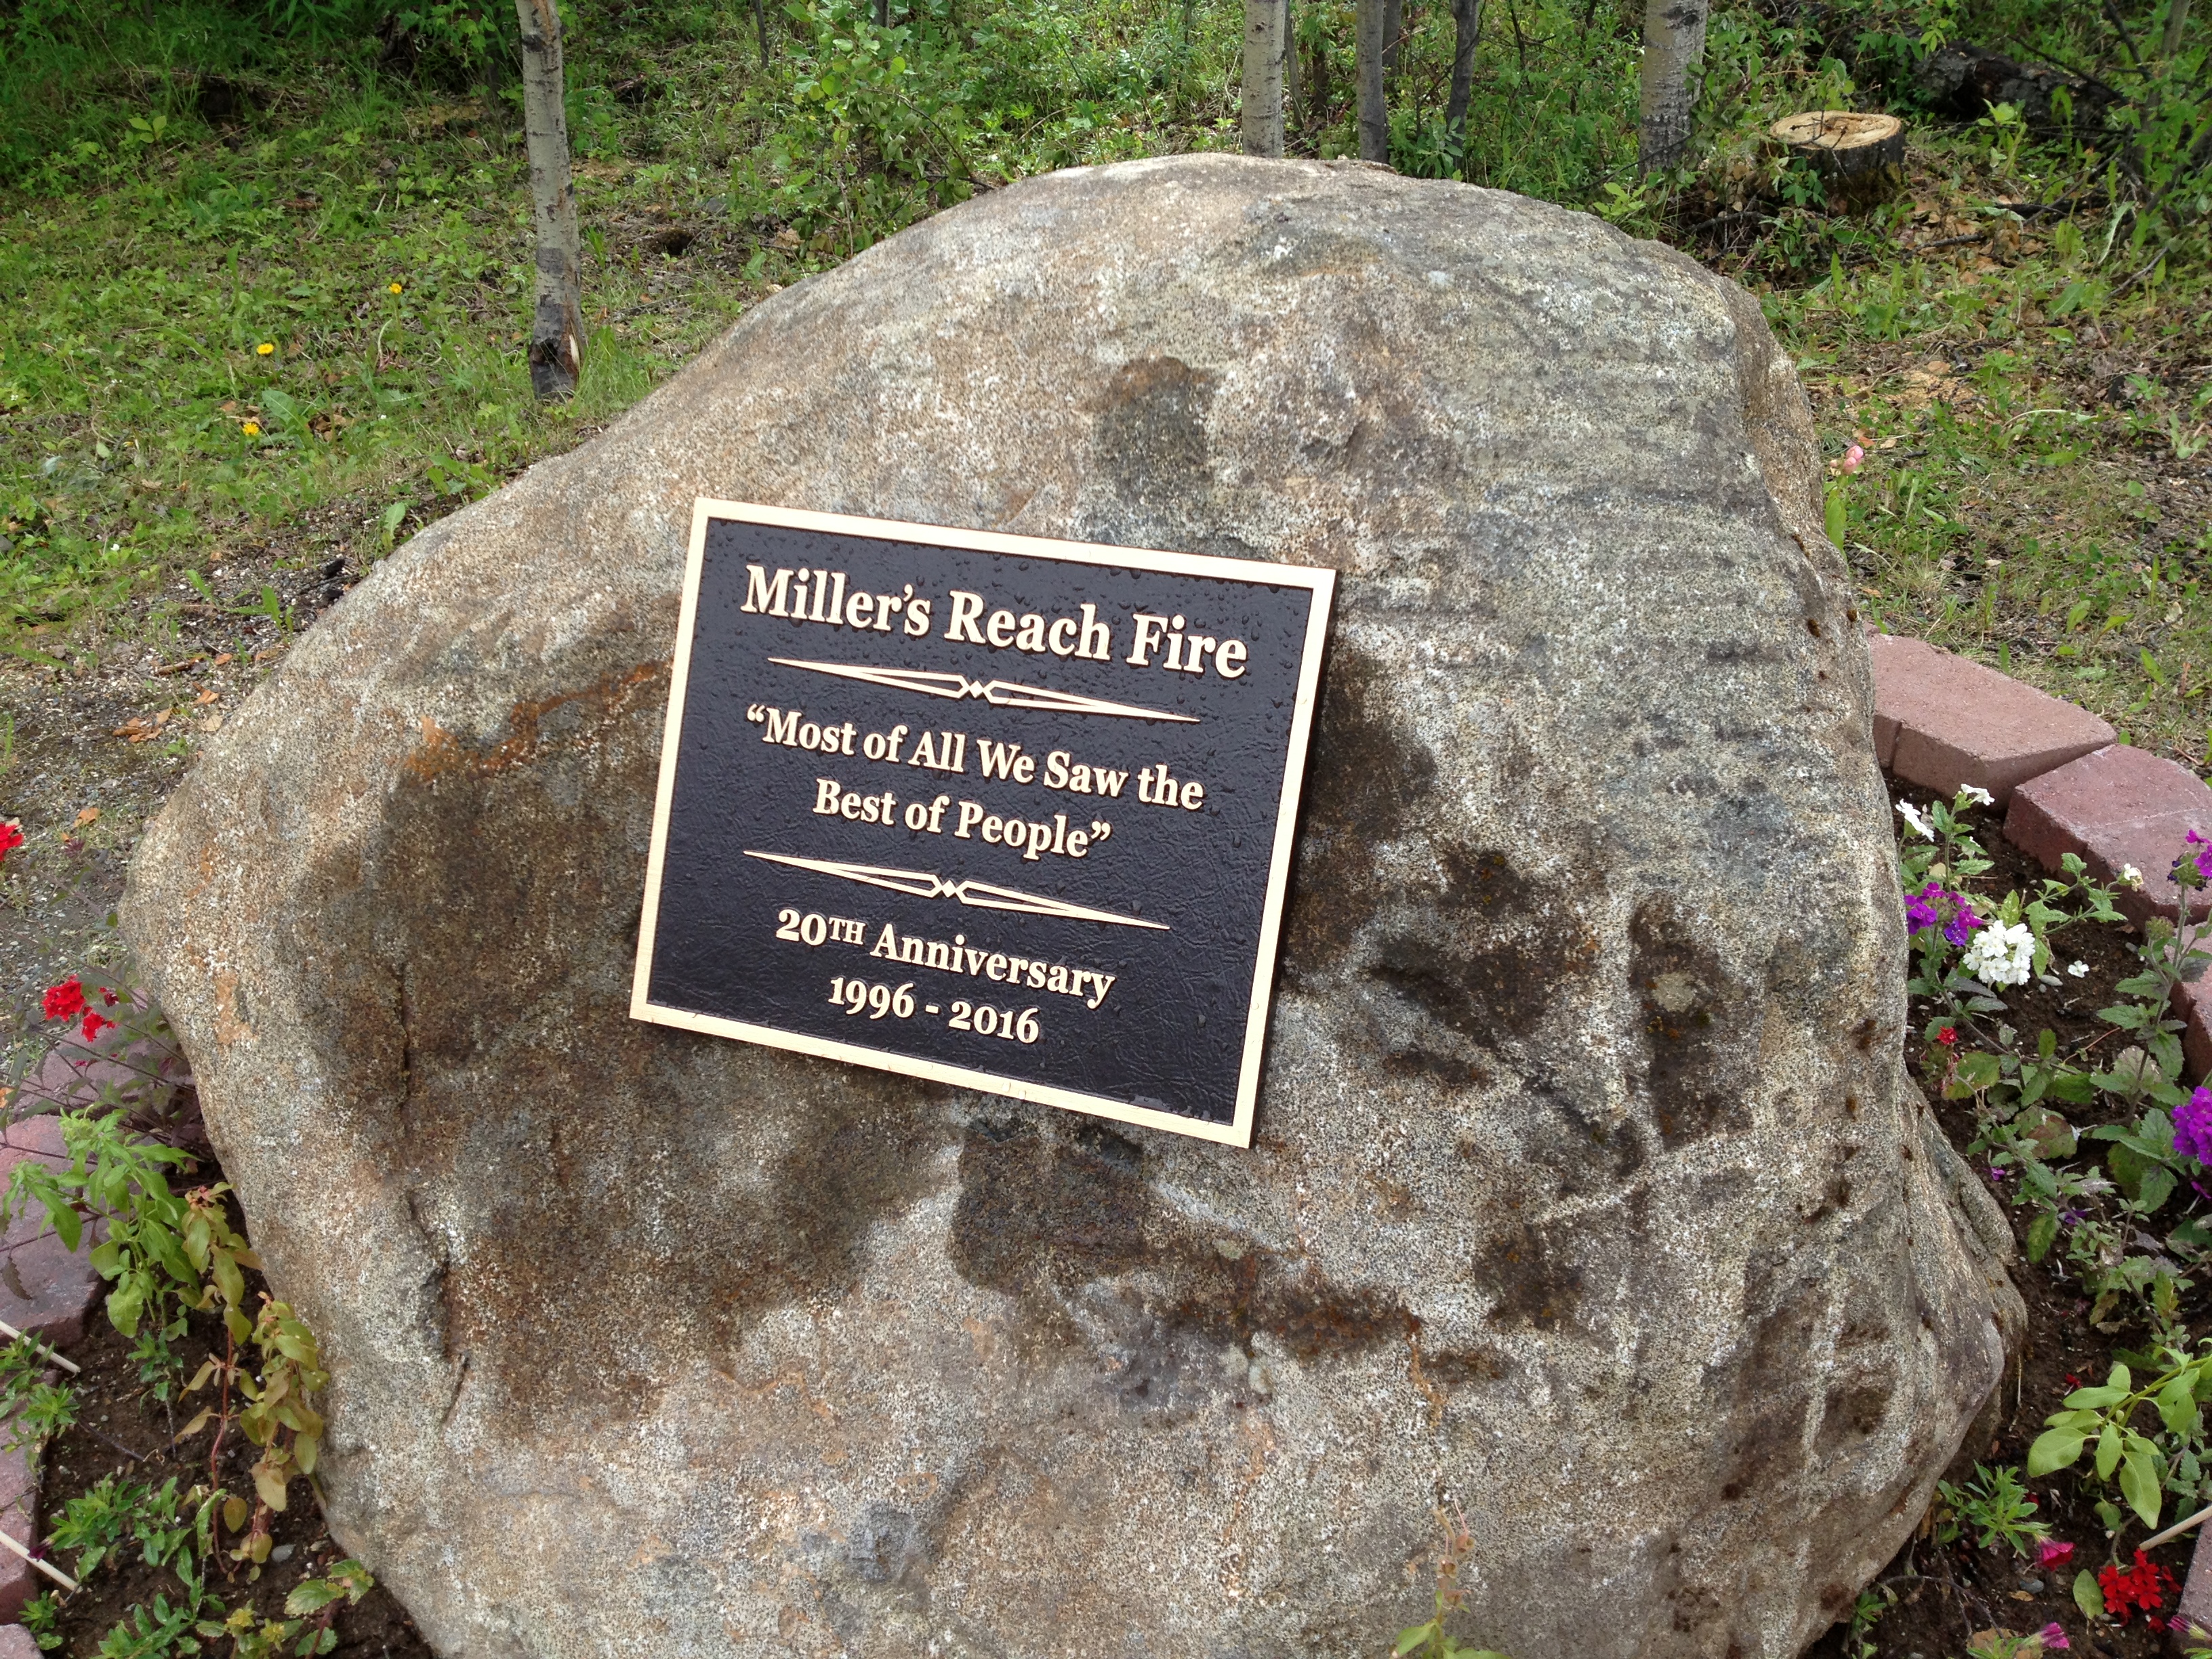 A bronze plaque set into a boulder in front of the West Lakes fire house in Big Lake recognizes the firefighters and community residents who helped fight the Miller's Reach fire twenty years ago. (Photo by Ellen Lockyer, Alaska Public Media - Anchorage)